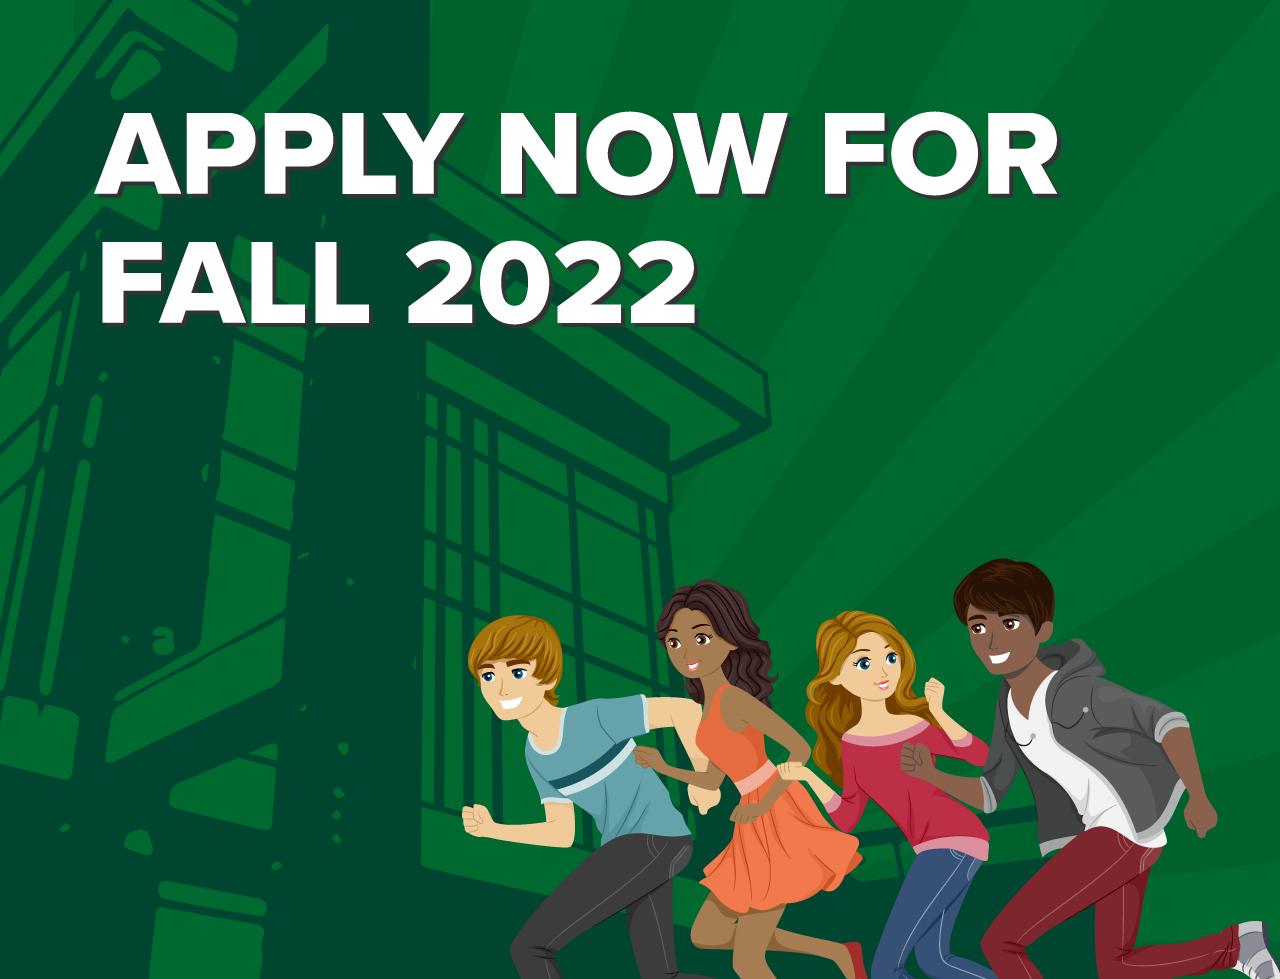 Apply now for Fall 2022